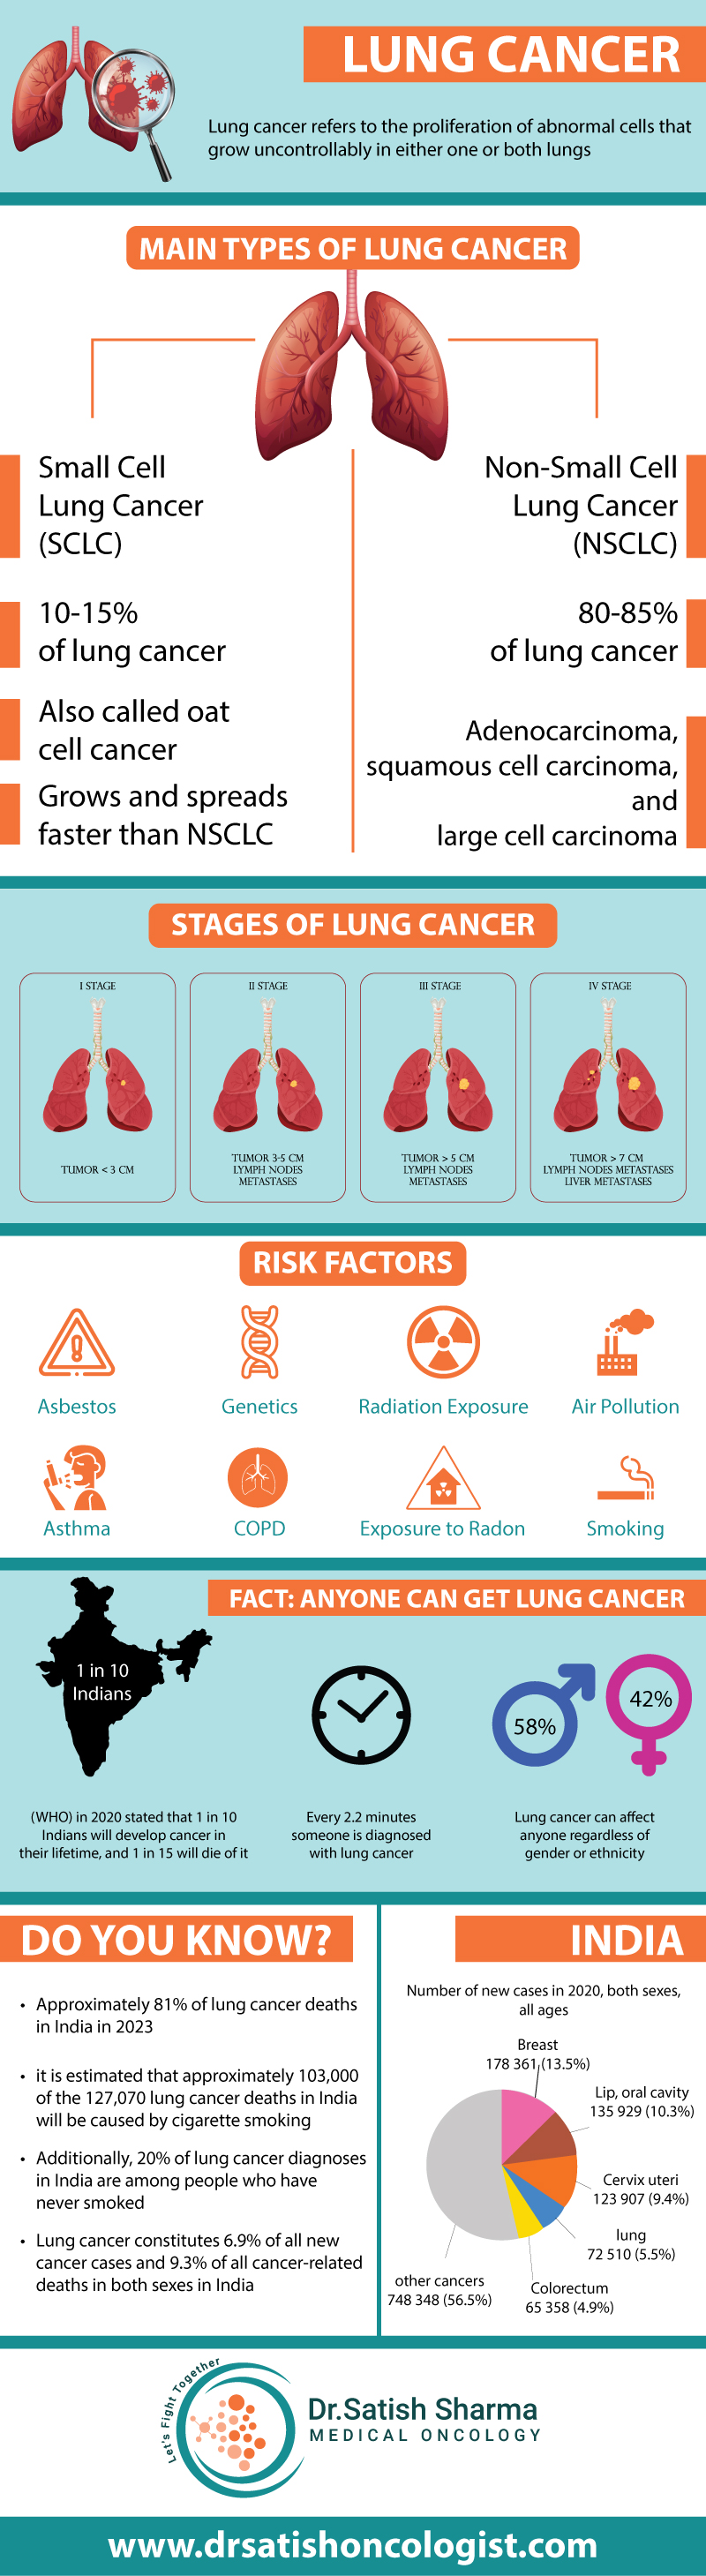 What is Lung cancer? Types, Stages, Risk Factors , Facts